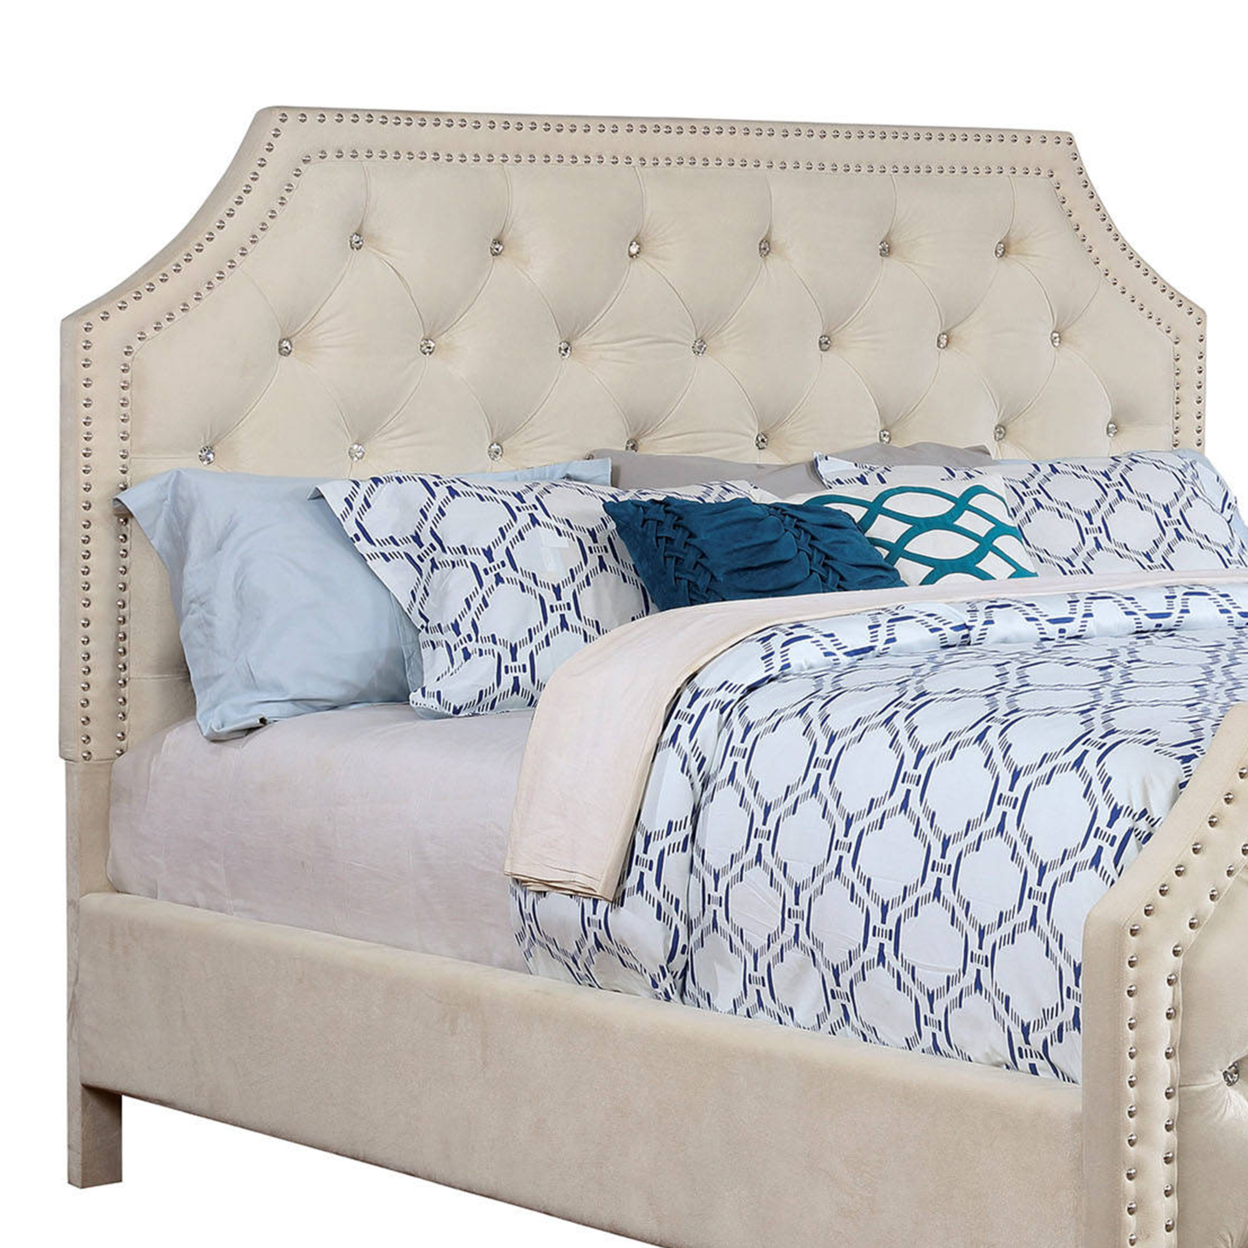 Button Tufted Fabric Upholstered Queen Bed With Corner Cut Design, Beige- Saltoro Sherpi